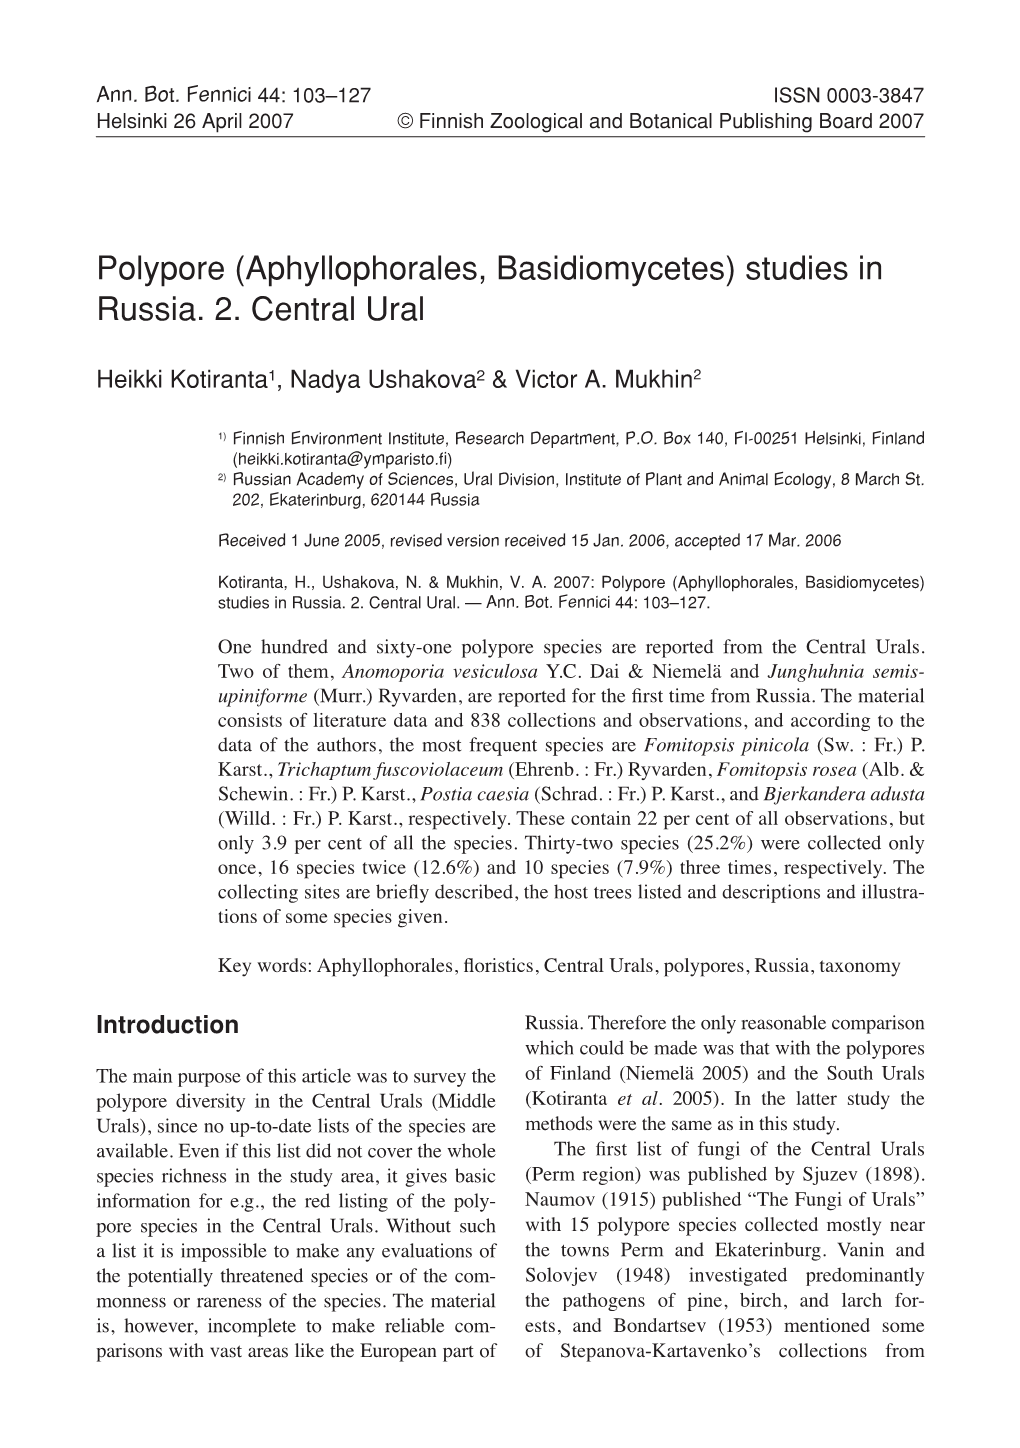 Polypore (Aphyllophorales, Basidiomycetes) Studies in Russia